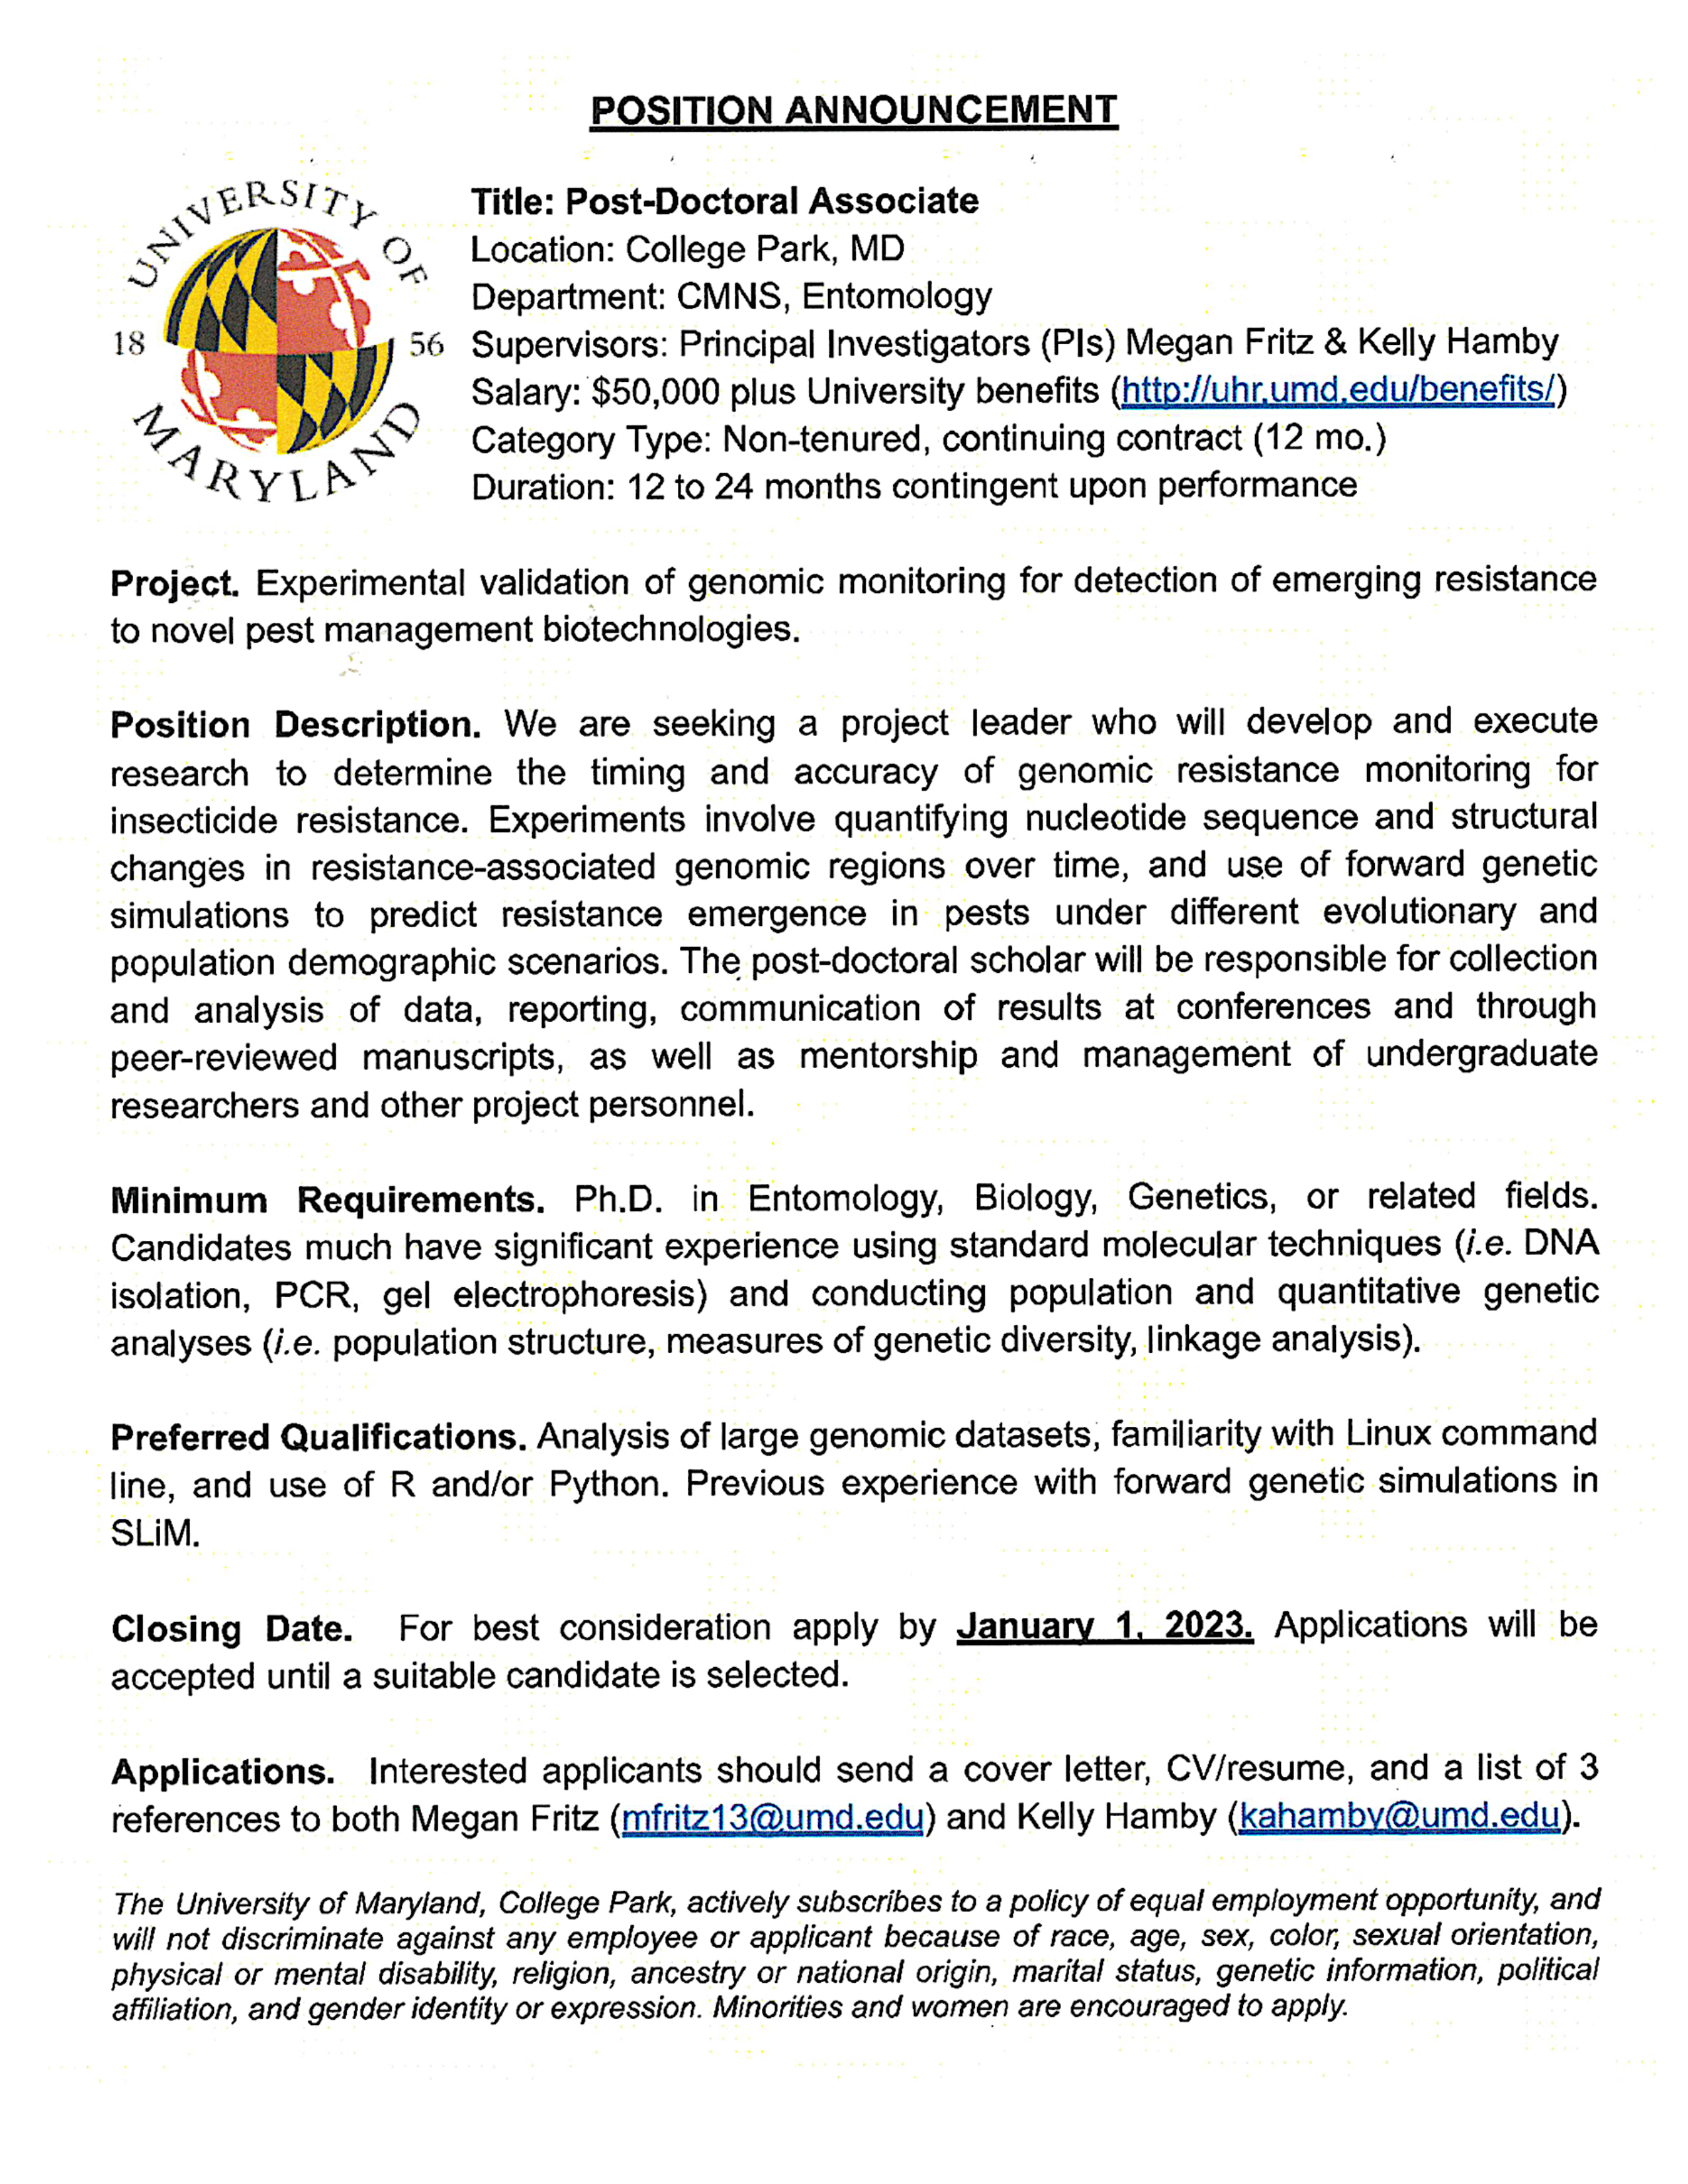 university_of_maryland_position_announcement_flyer.png